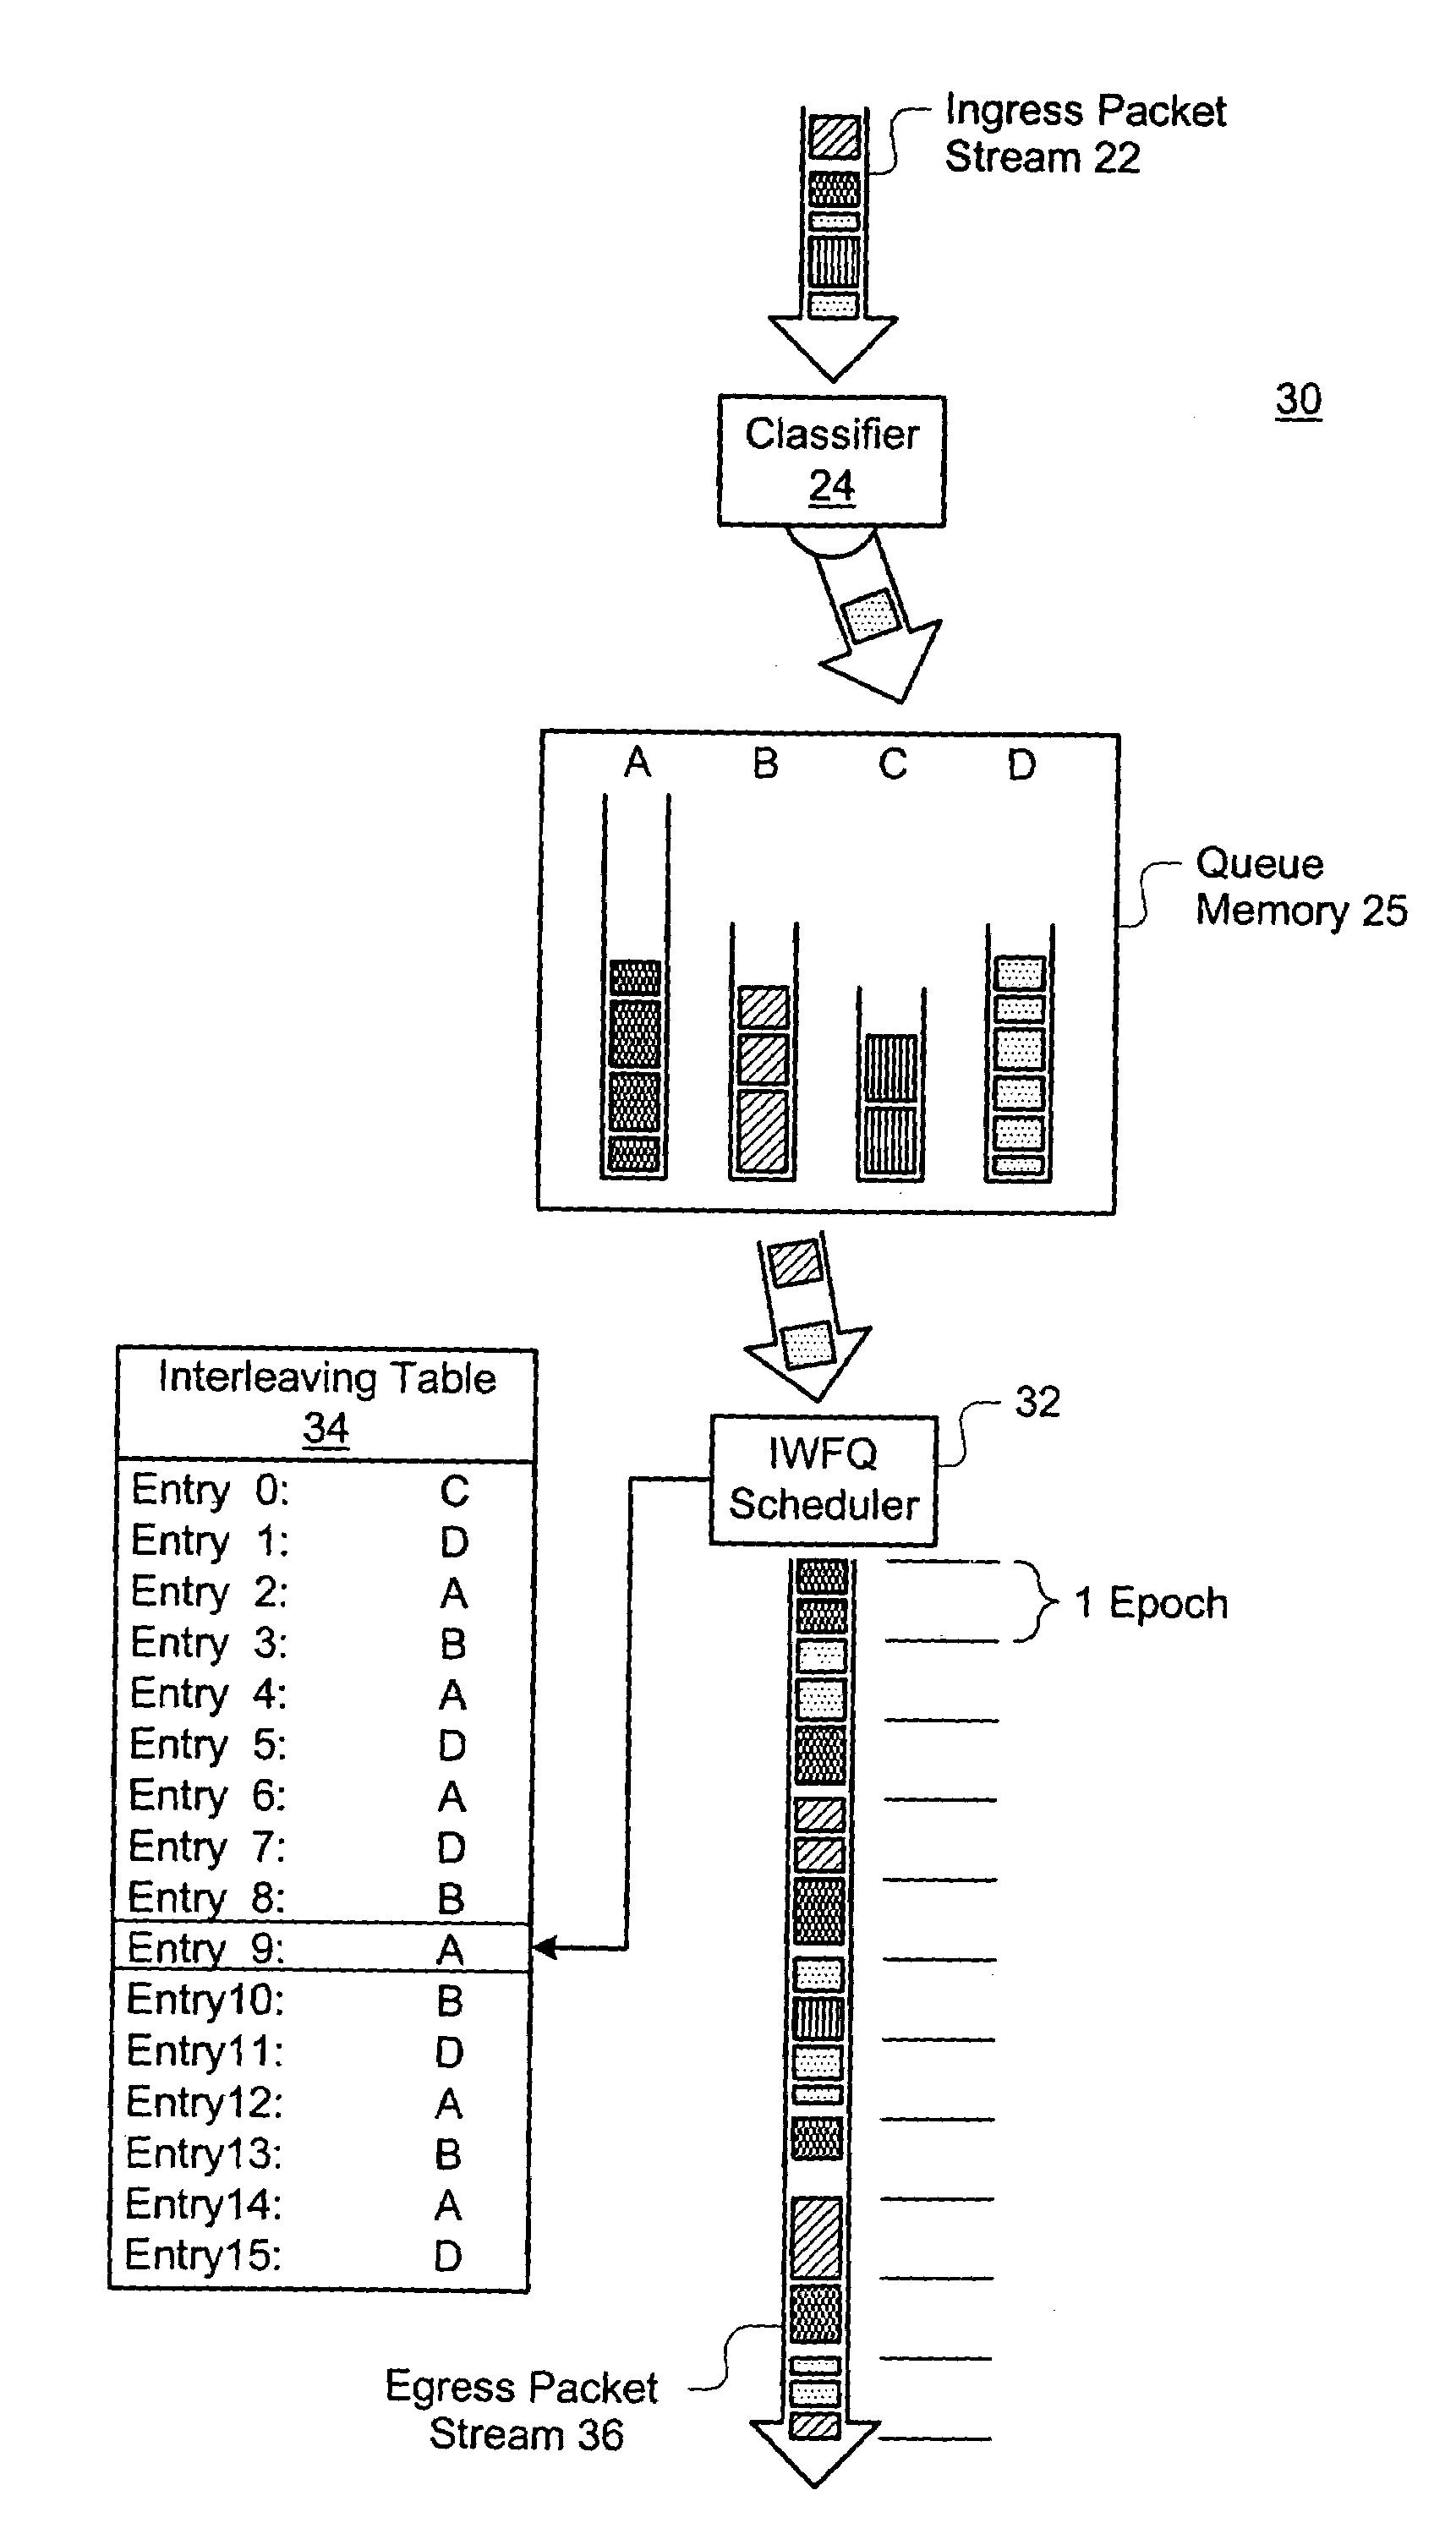 Interleaved weighted fair queuing mechanism and system